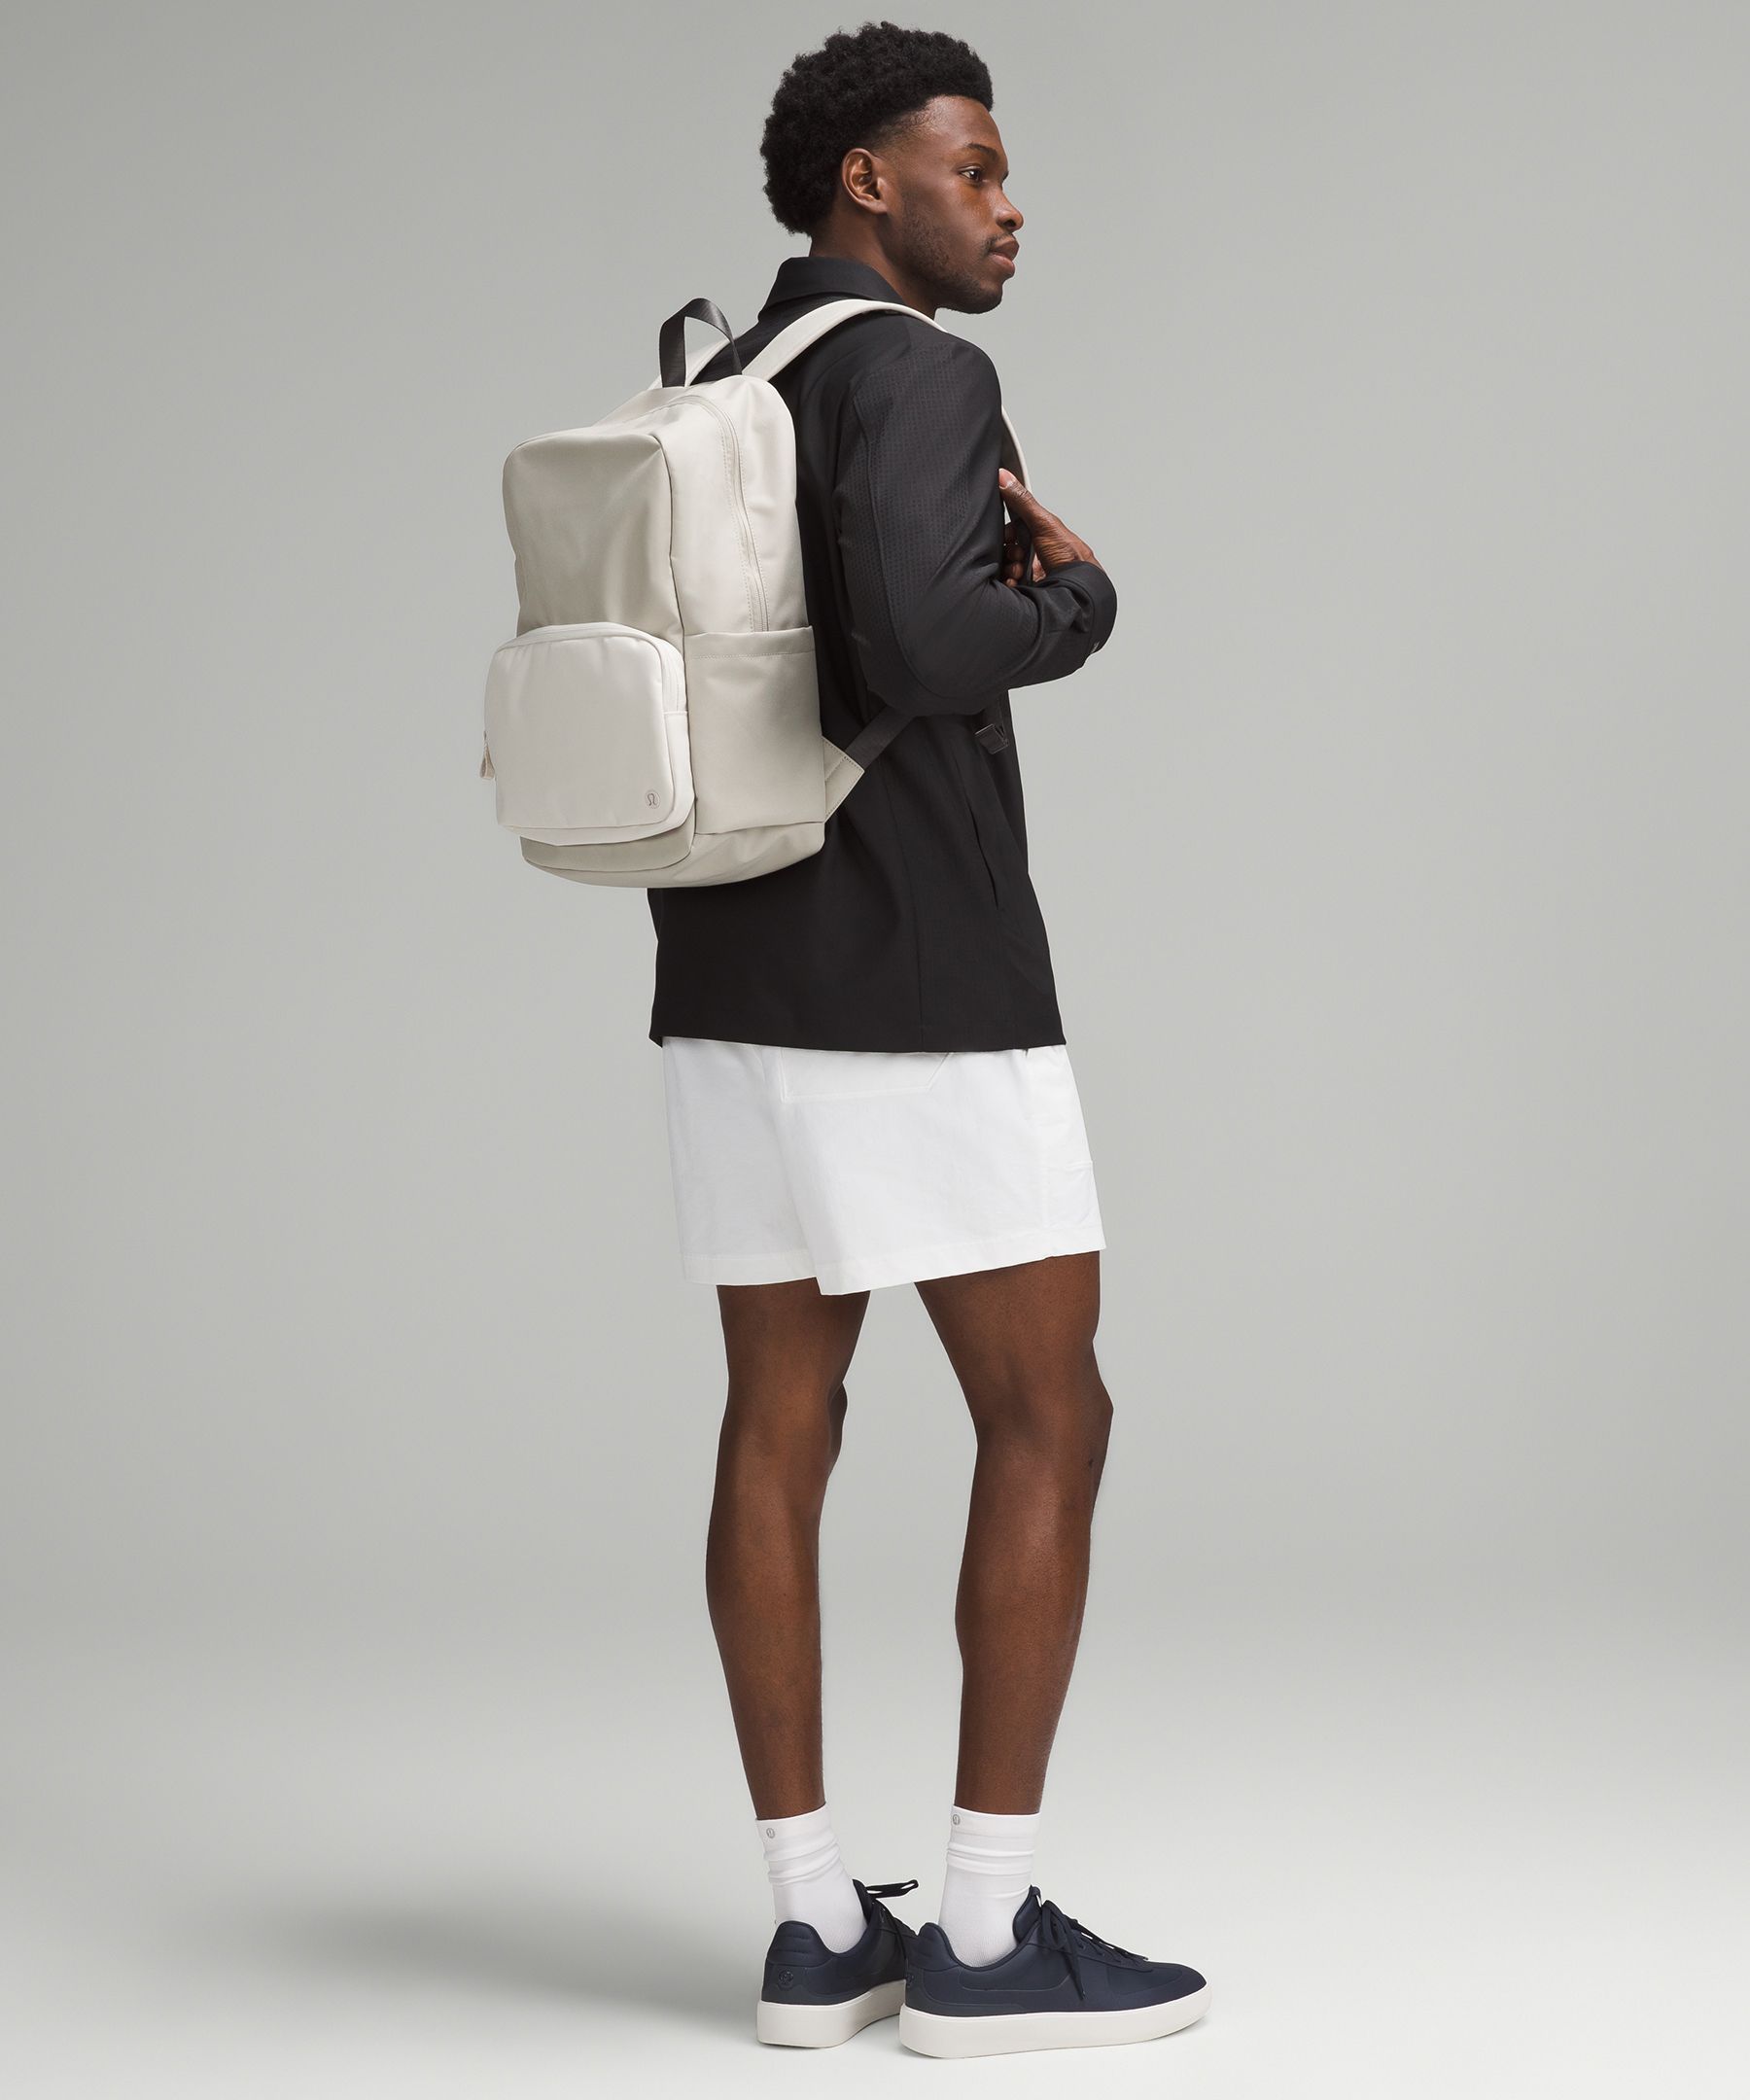 Shop Lululemon Backpack With Laptop Compartment - Everywhere 22l Tech Canvas